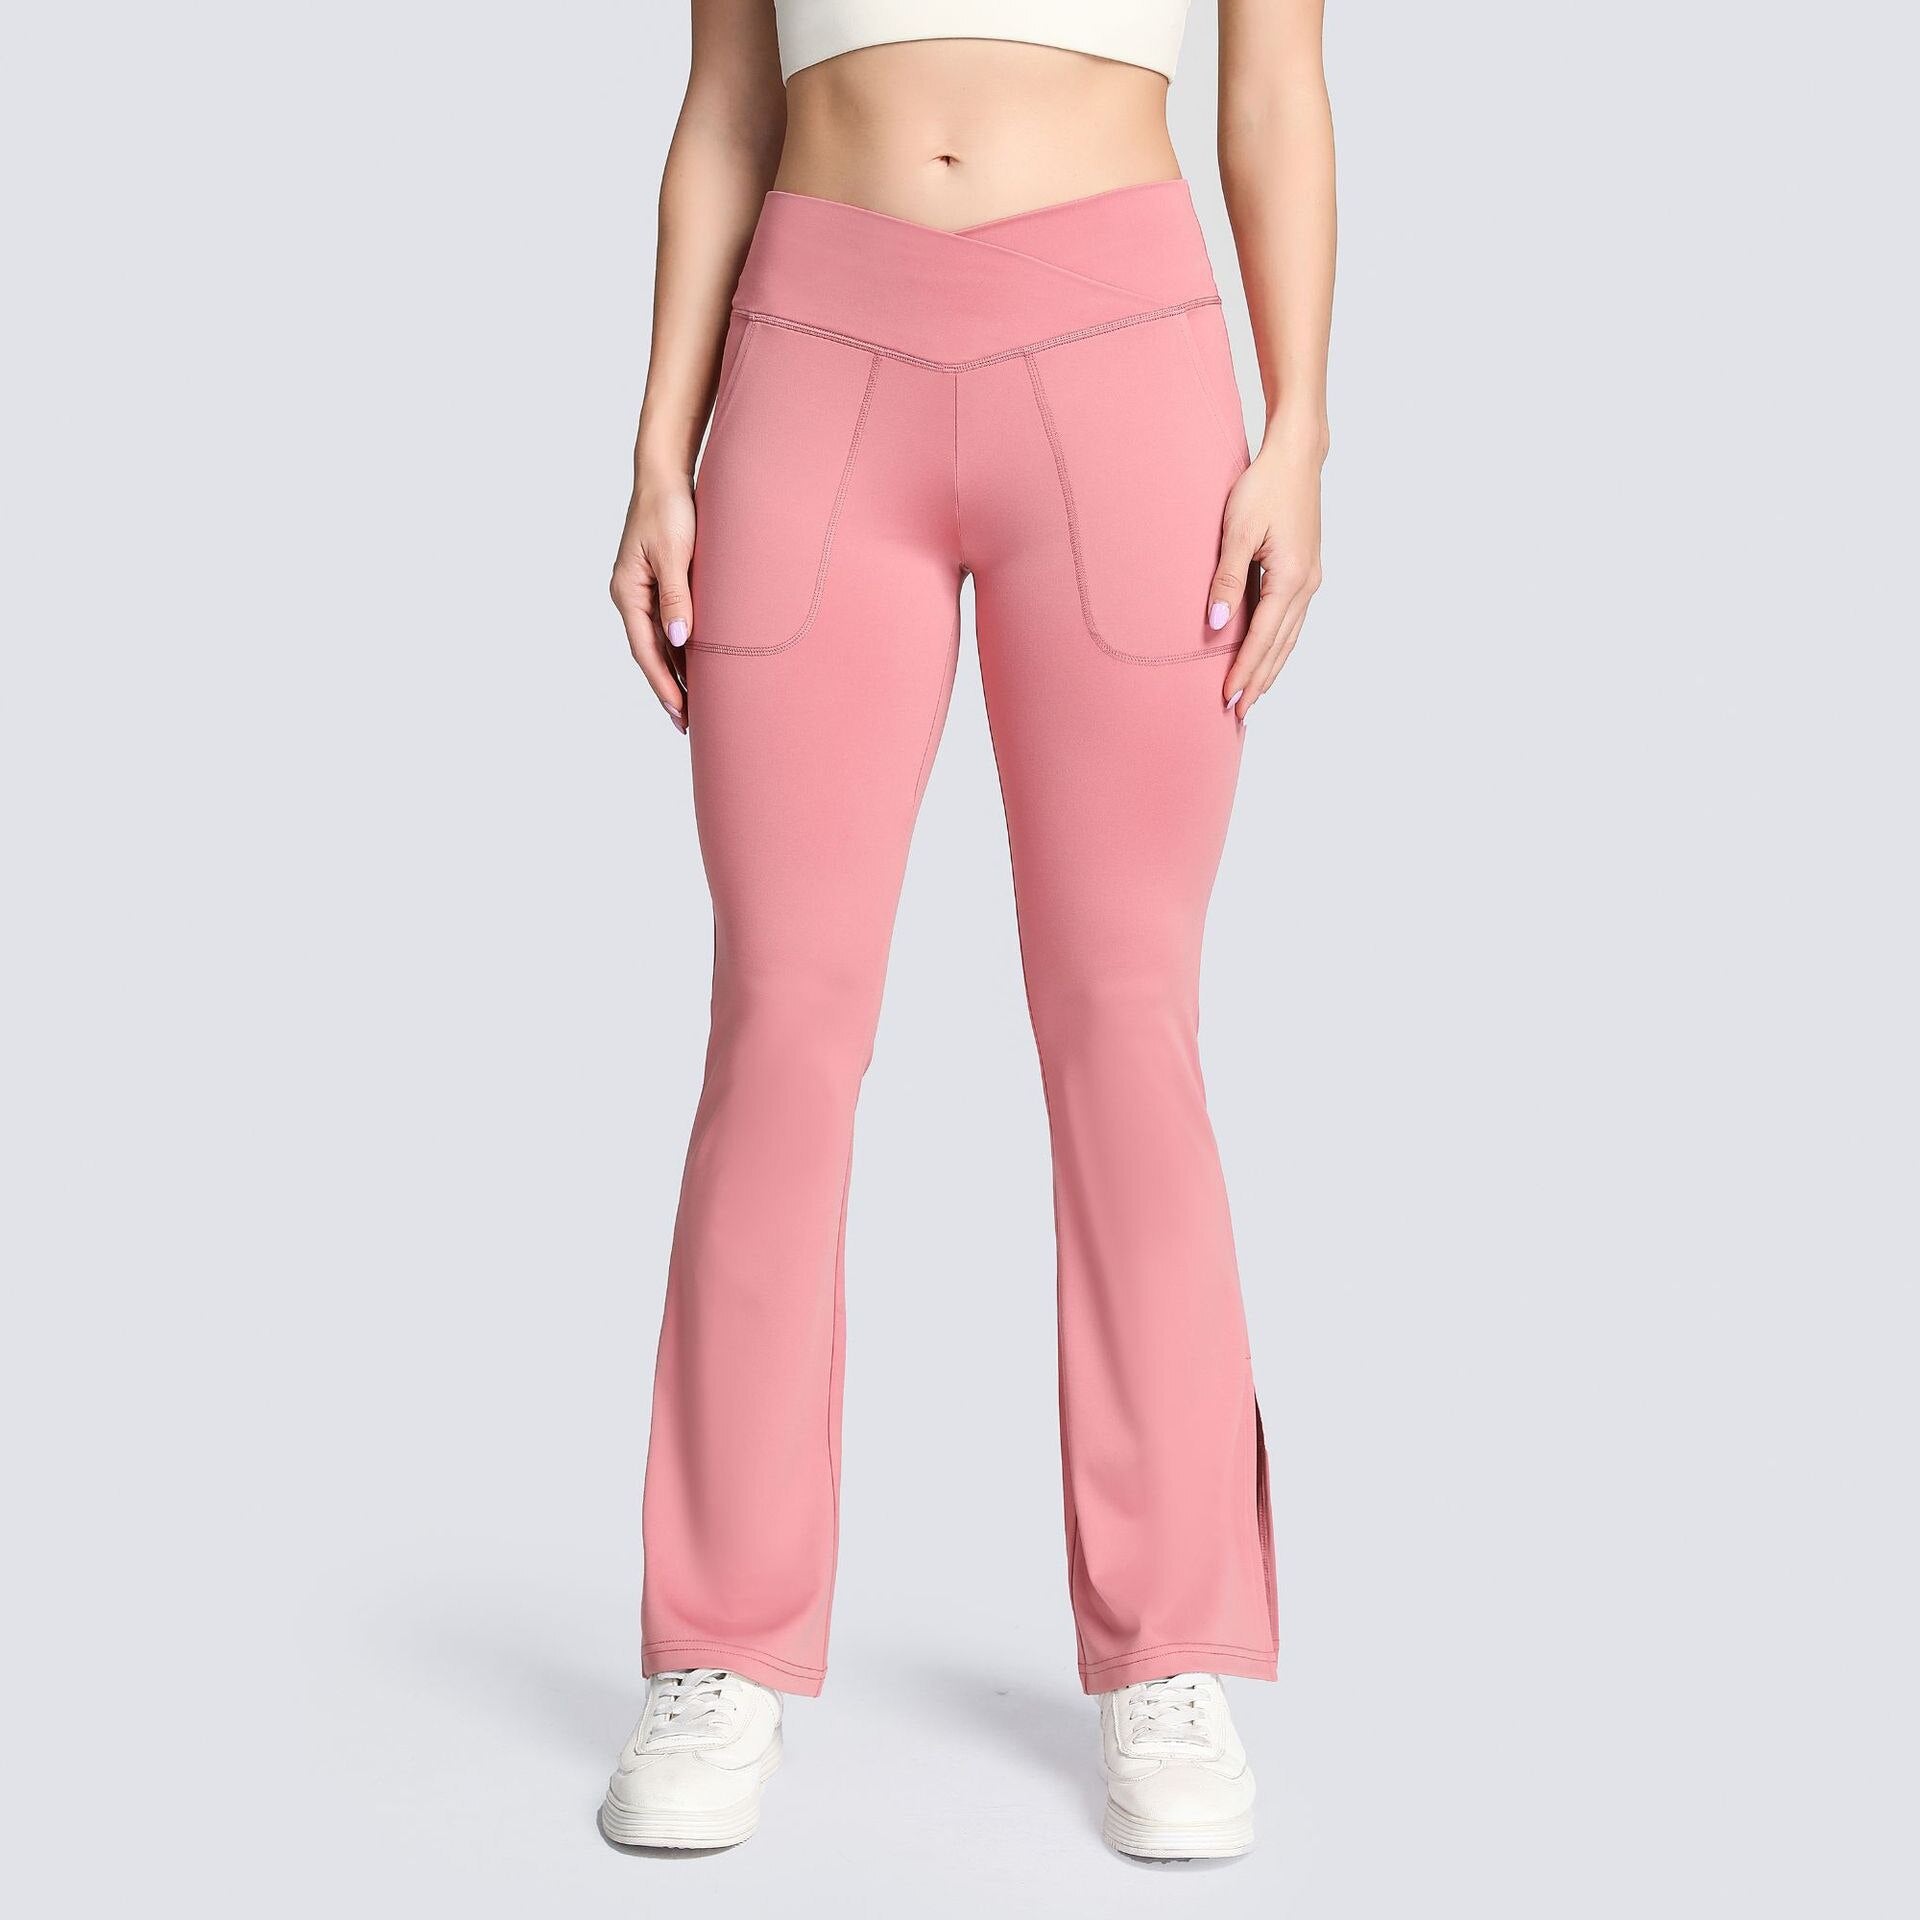 Pink Flare Yoga Pants for Women, V Crossover High Waisted Flare